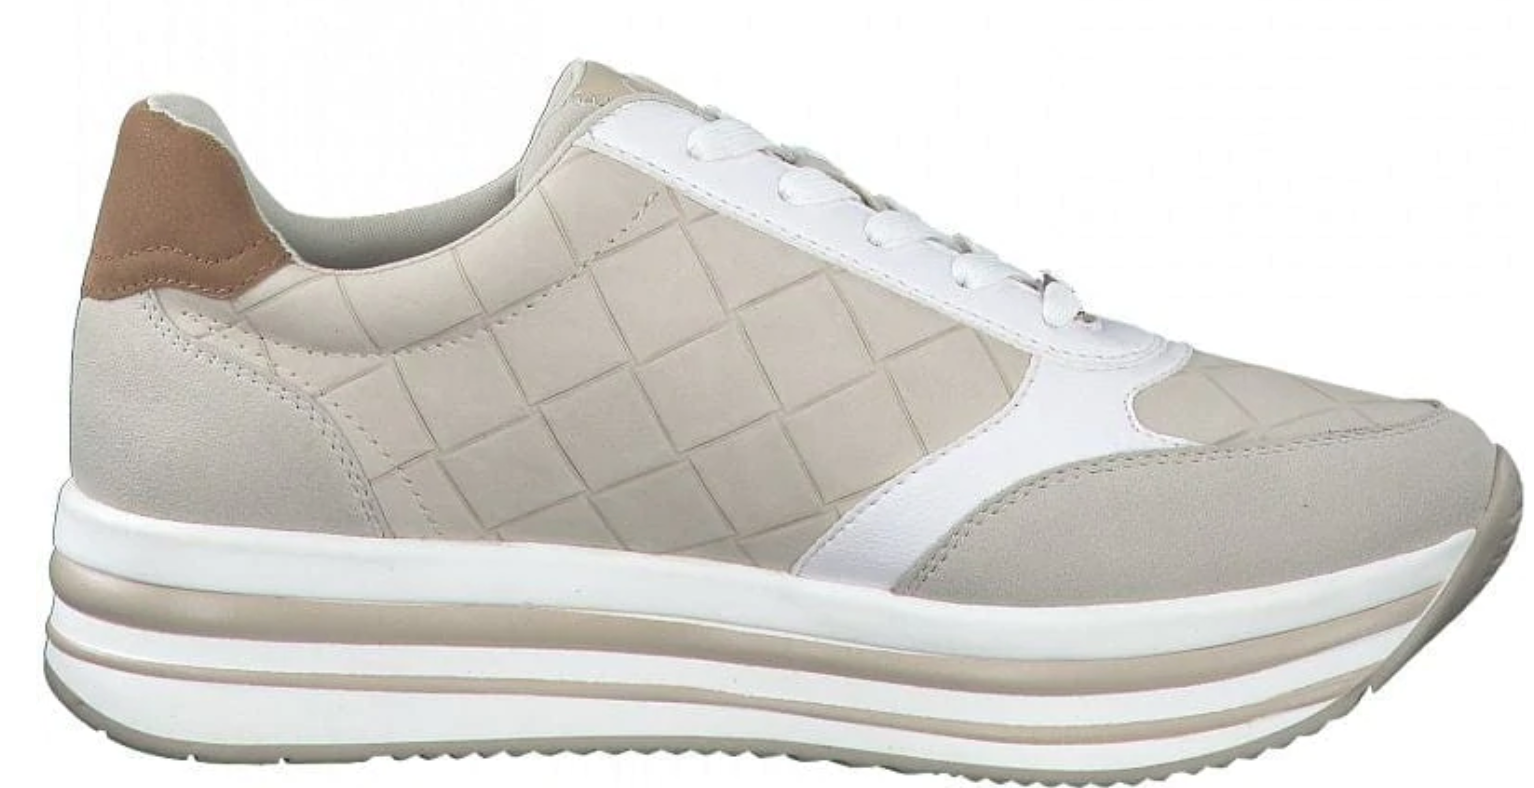 S.Oliver Womens Fashion Platform Quilted Trainer - Beige - The Foot Factory